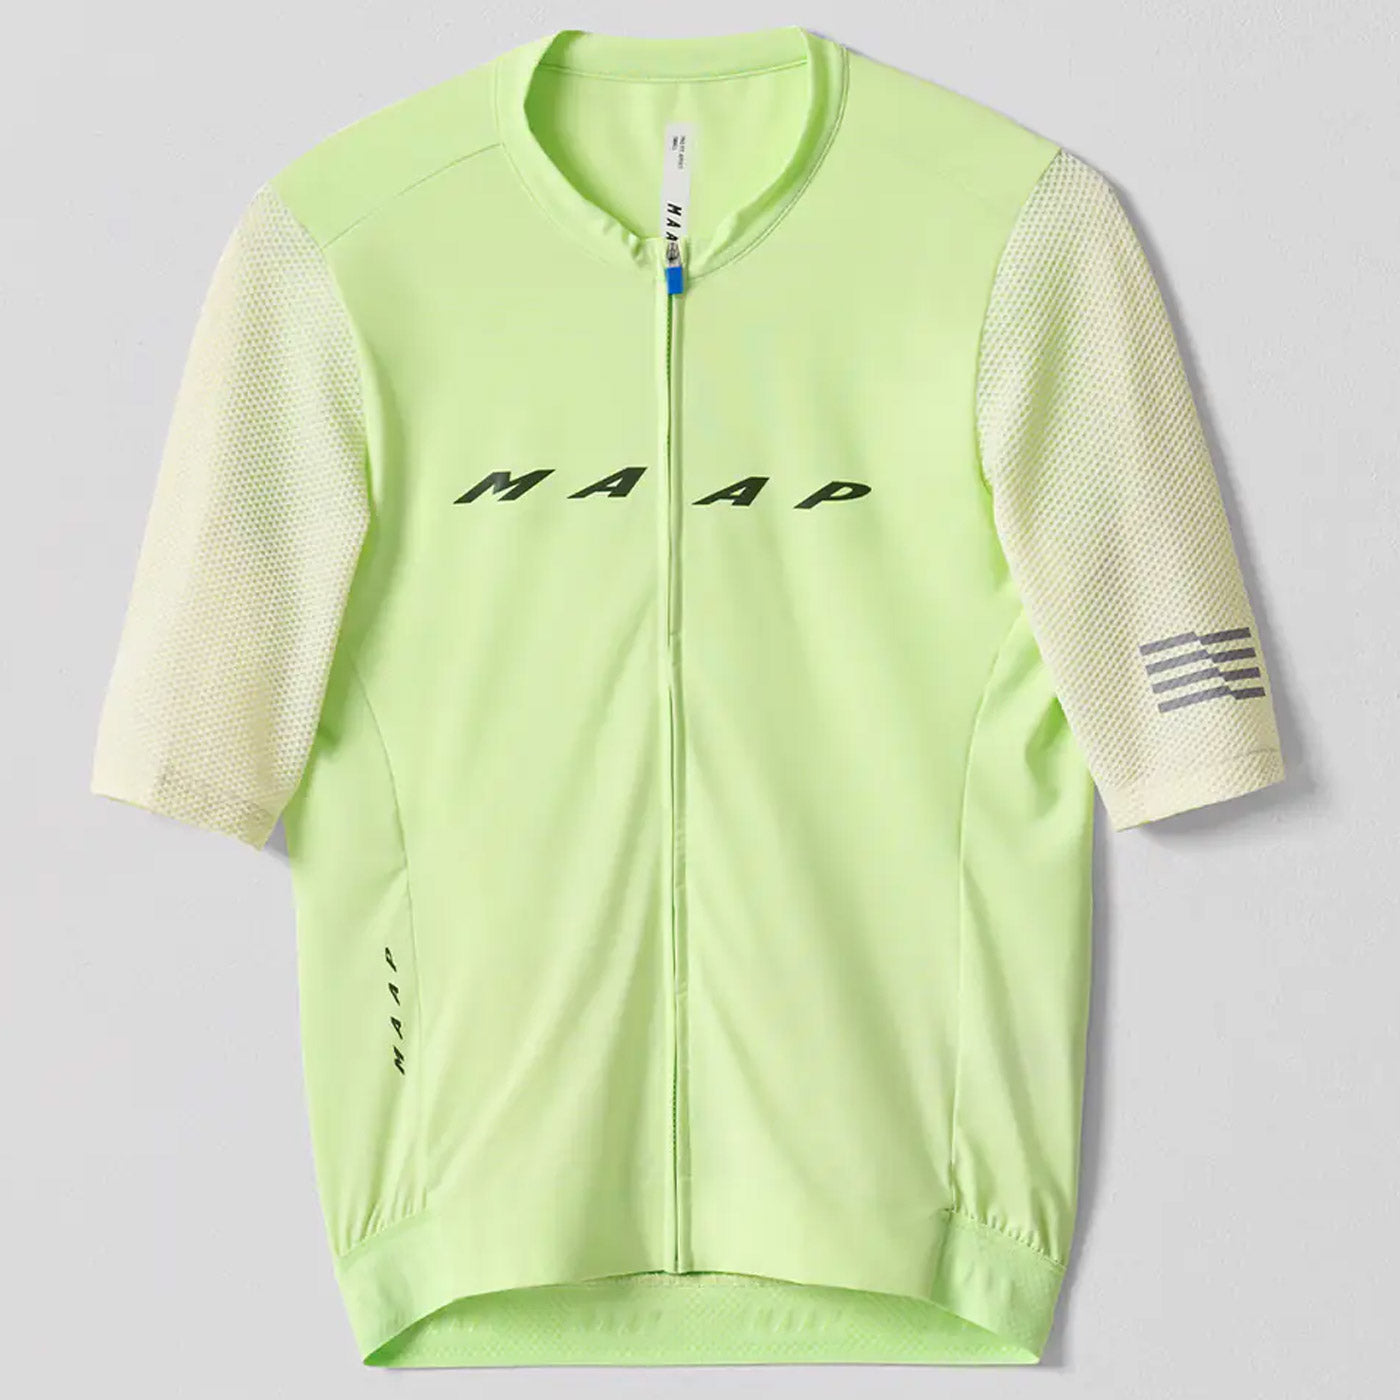 Maap Evade Pro Base 2.0 jersey - Green | All4cycling